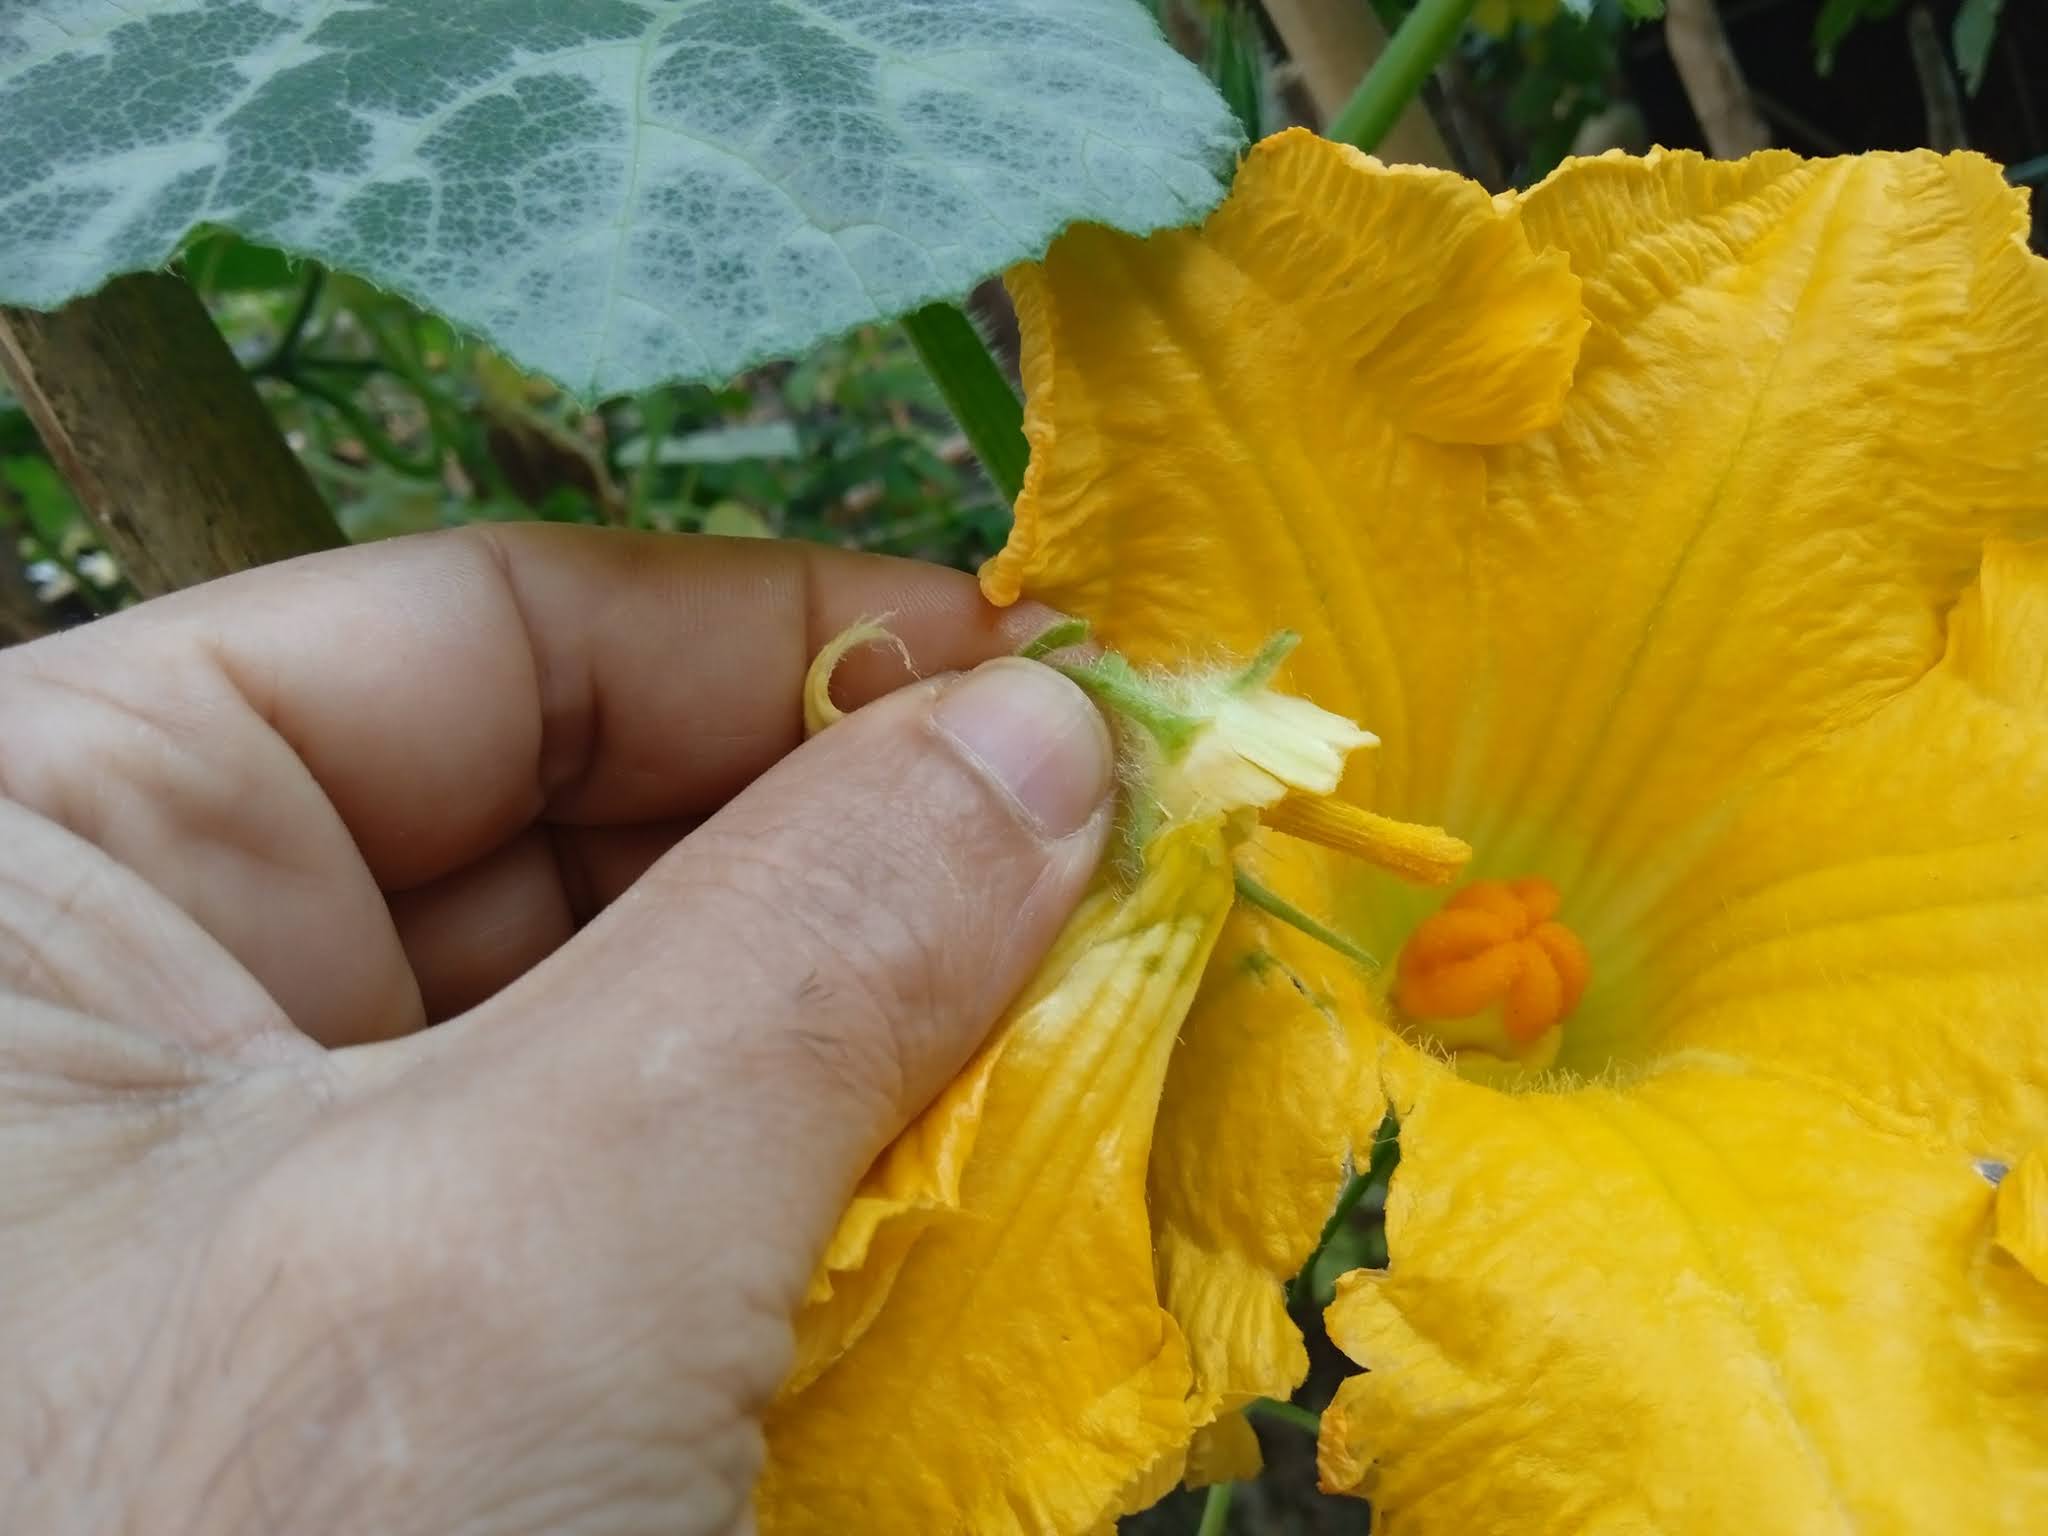 Simply take a male anther and touch it to the female stigma a couple of times, as if brushing paint. This will be enough to pollinate the stigma, which will then produce squash.